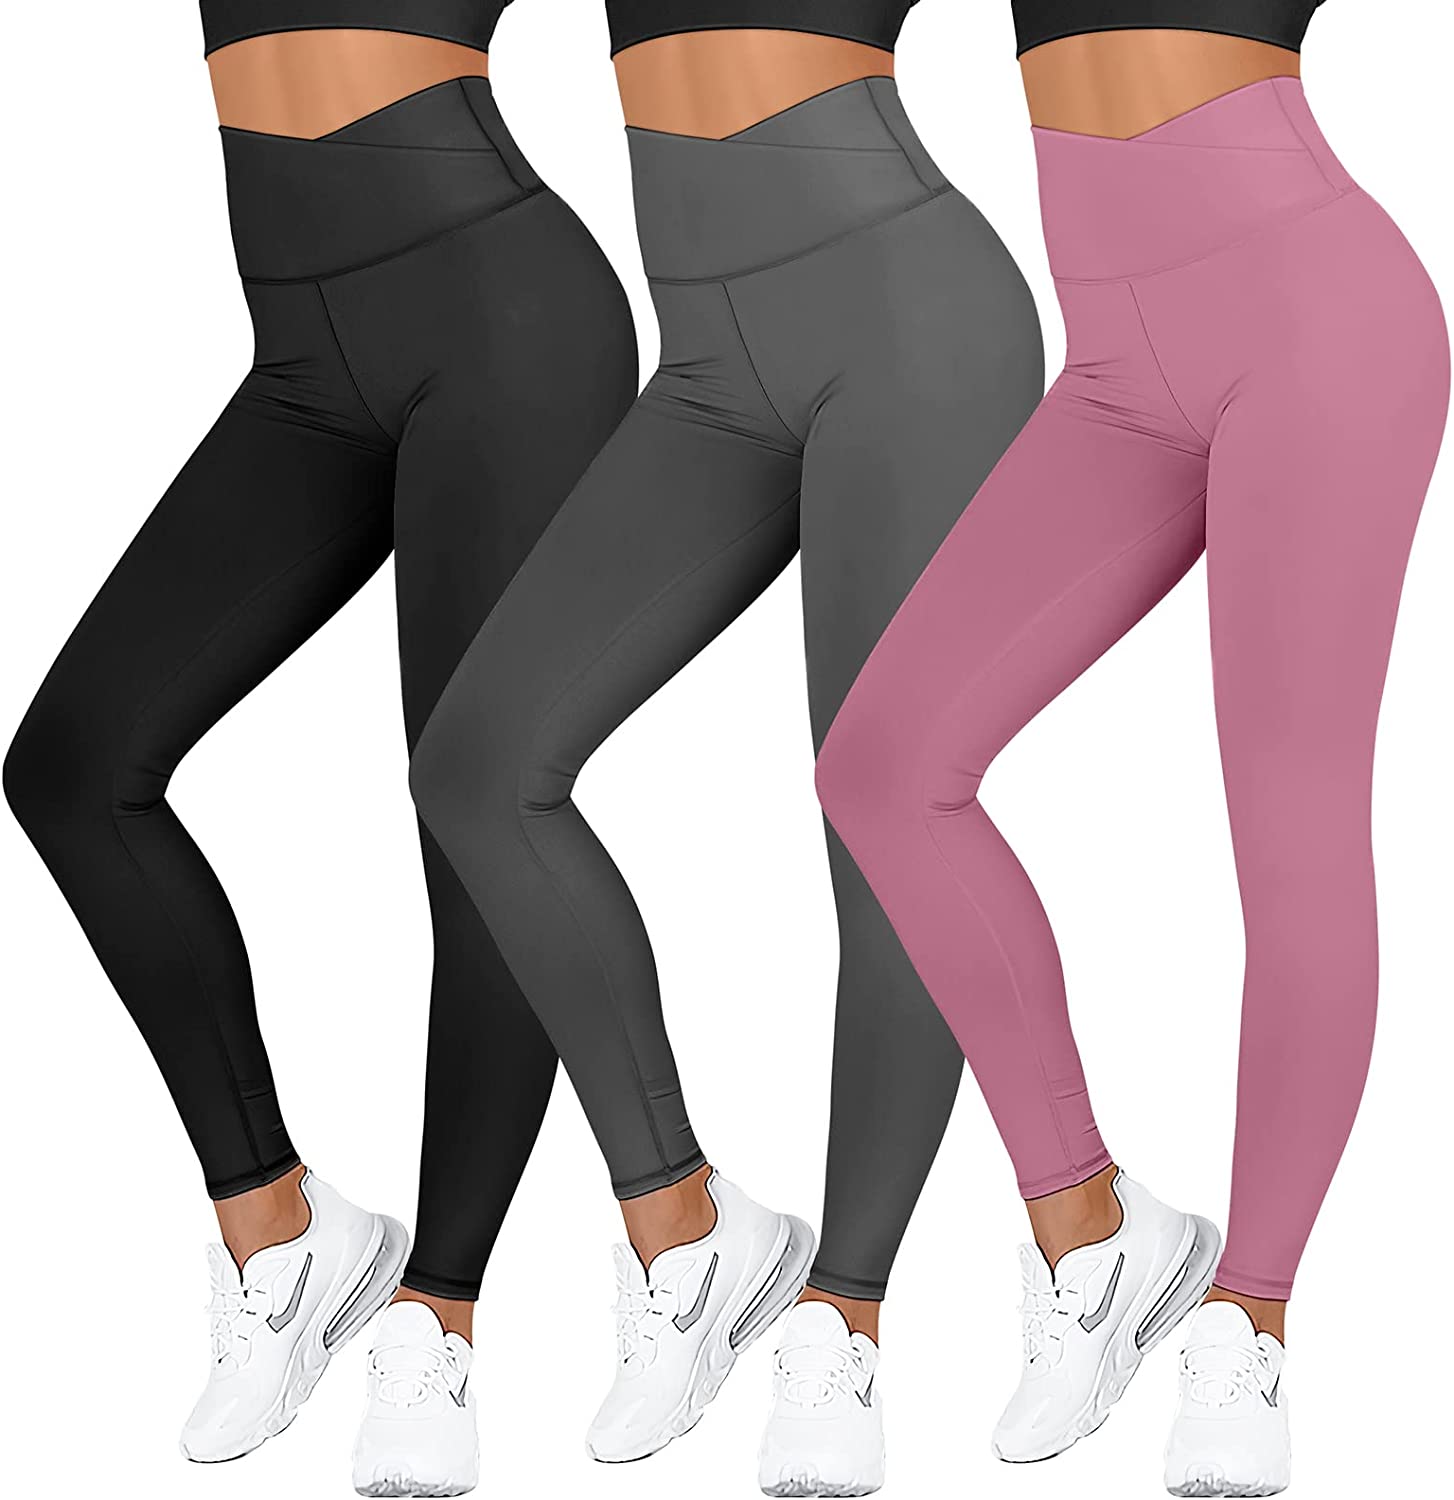  3 Pack Leggings For Women-No See-Through High